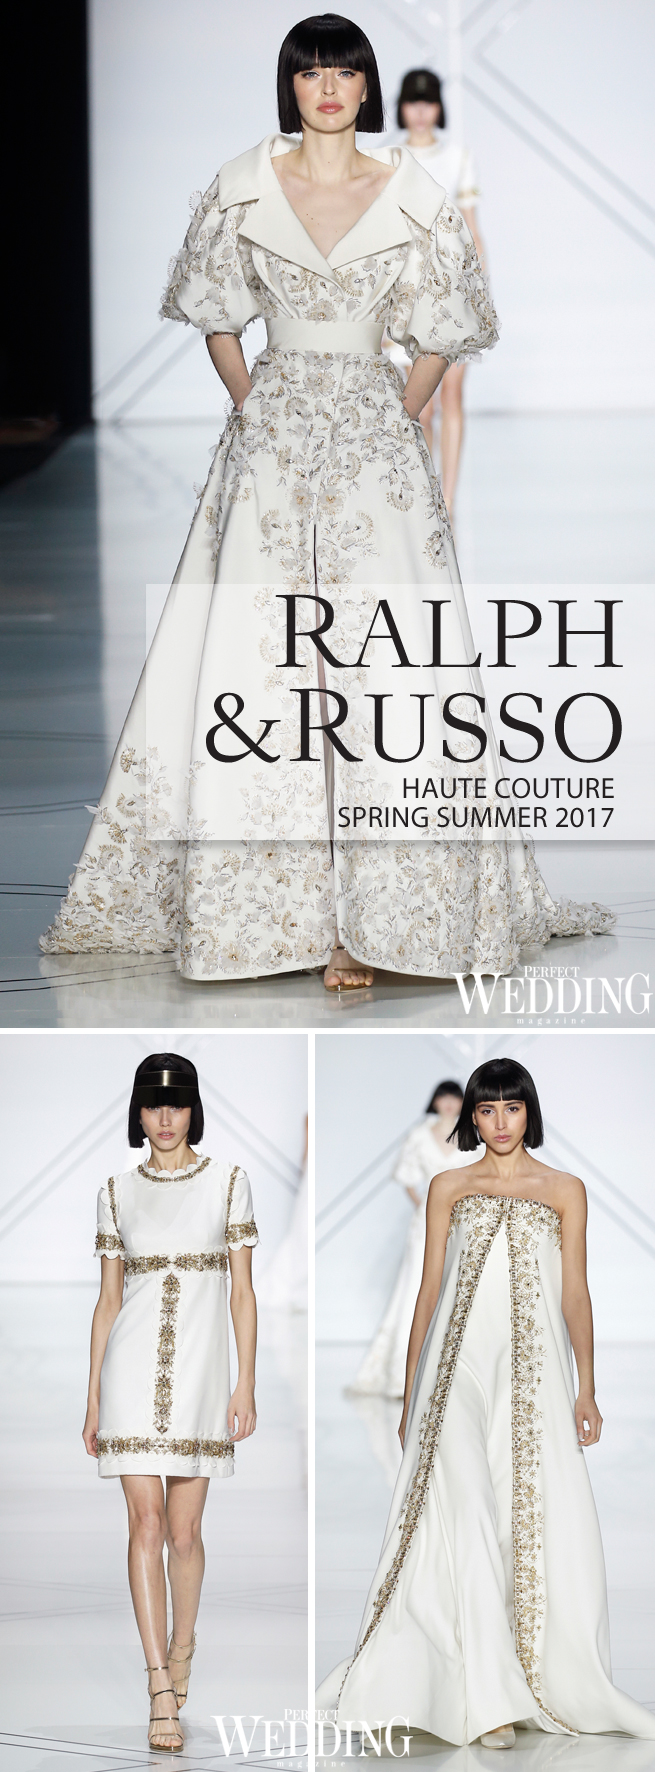 RalphandRusso, Ralph&Russo, Haute Couture, Paris Fashion week, Spring Summer 2017 Haute Couture, Perfect Wedding Magazine, Perfect Wedding Blog, Couture Bride